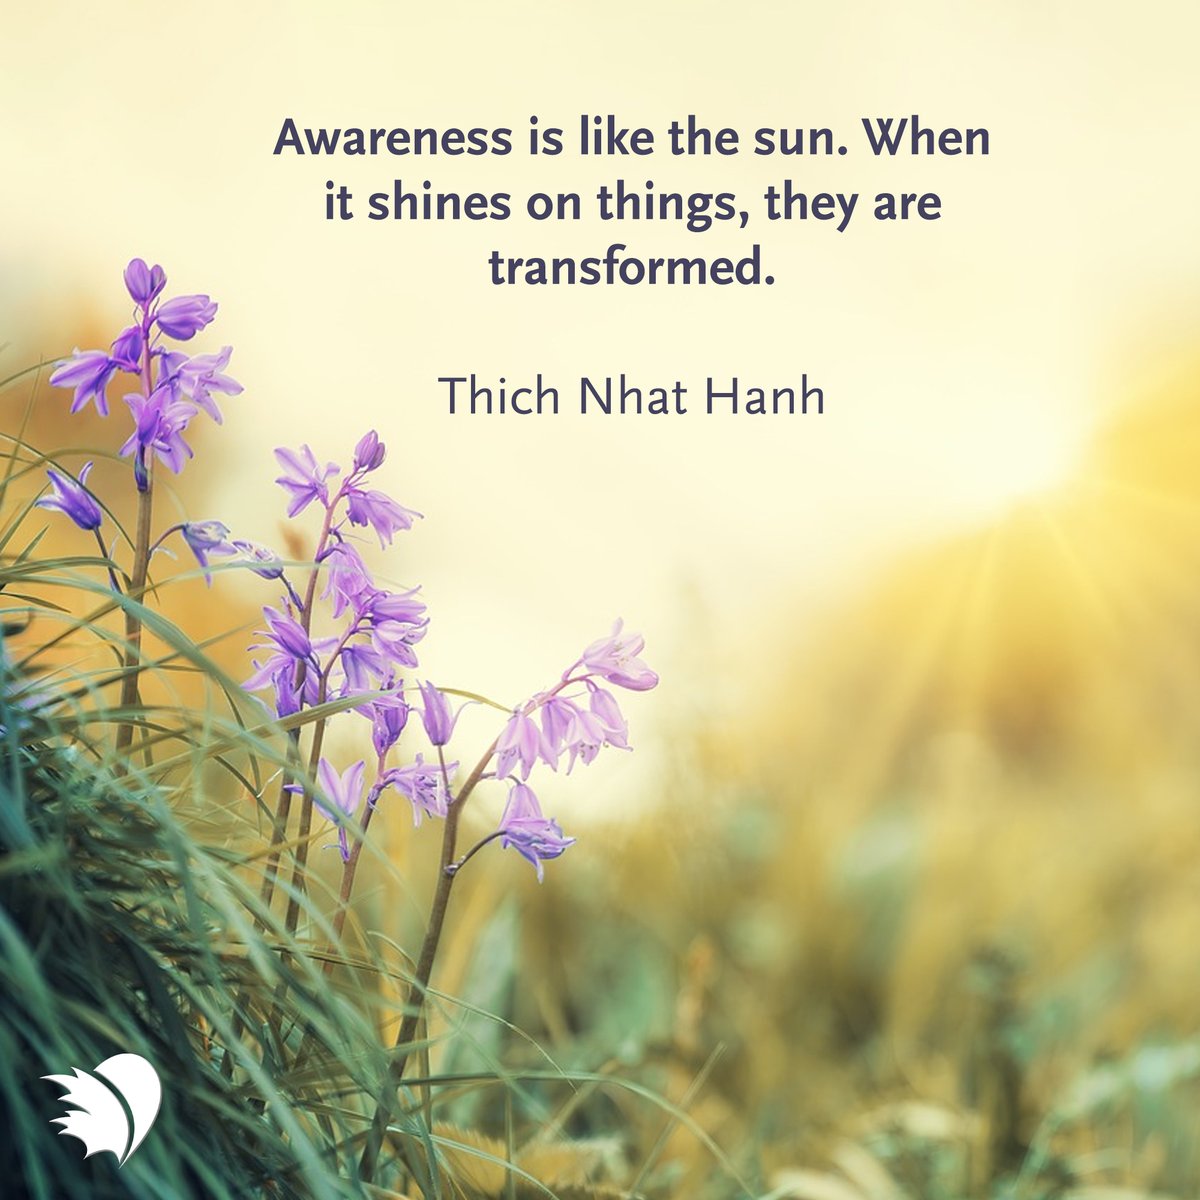 Awareness is like the sun. When it shines on things, they are transformed ☀️

#PHACanada #PositiveVibes #PositiveQuote #PHcommunity #MotivationalQuotes